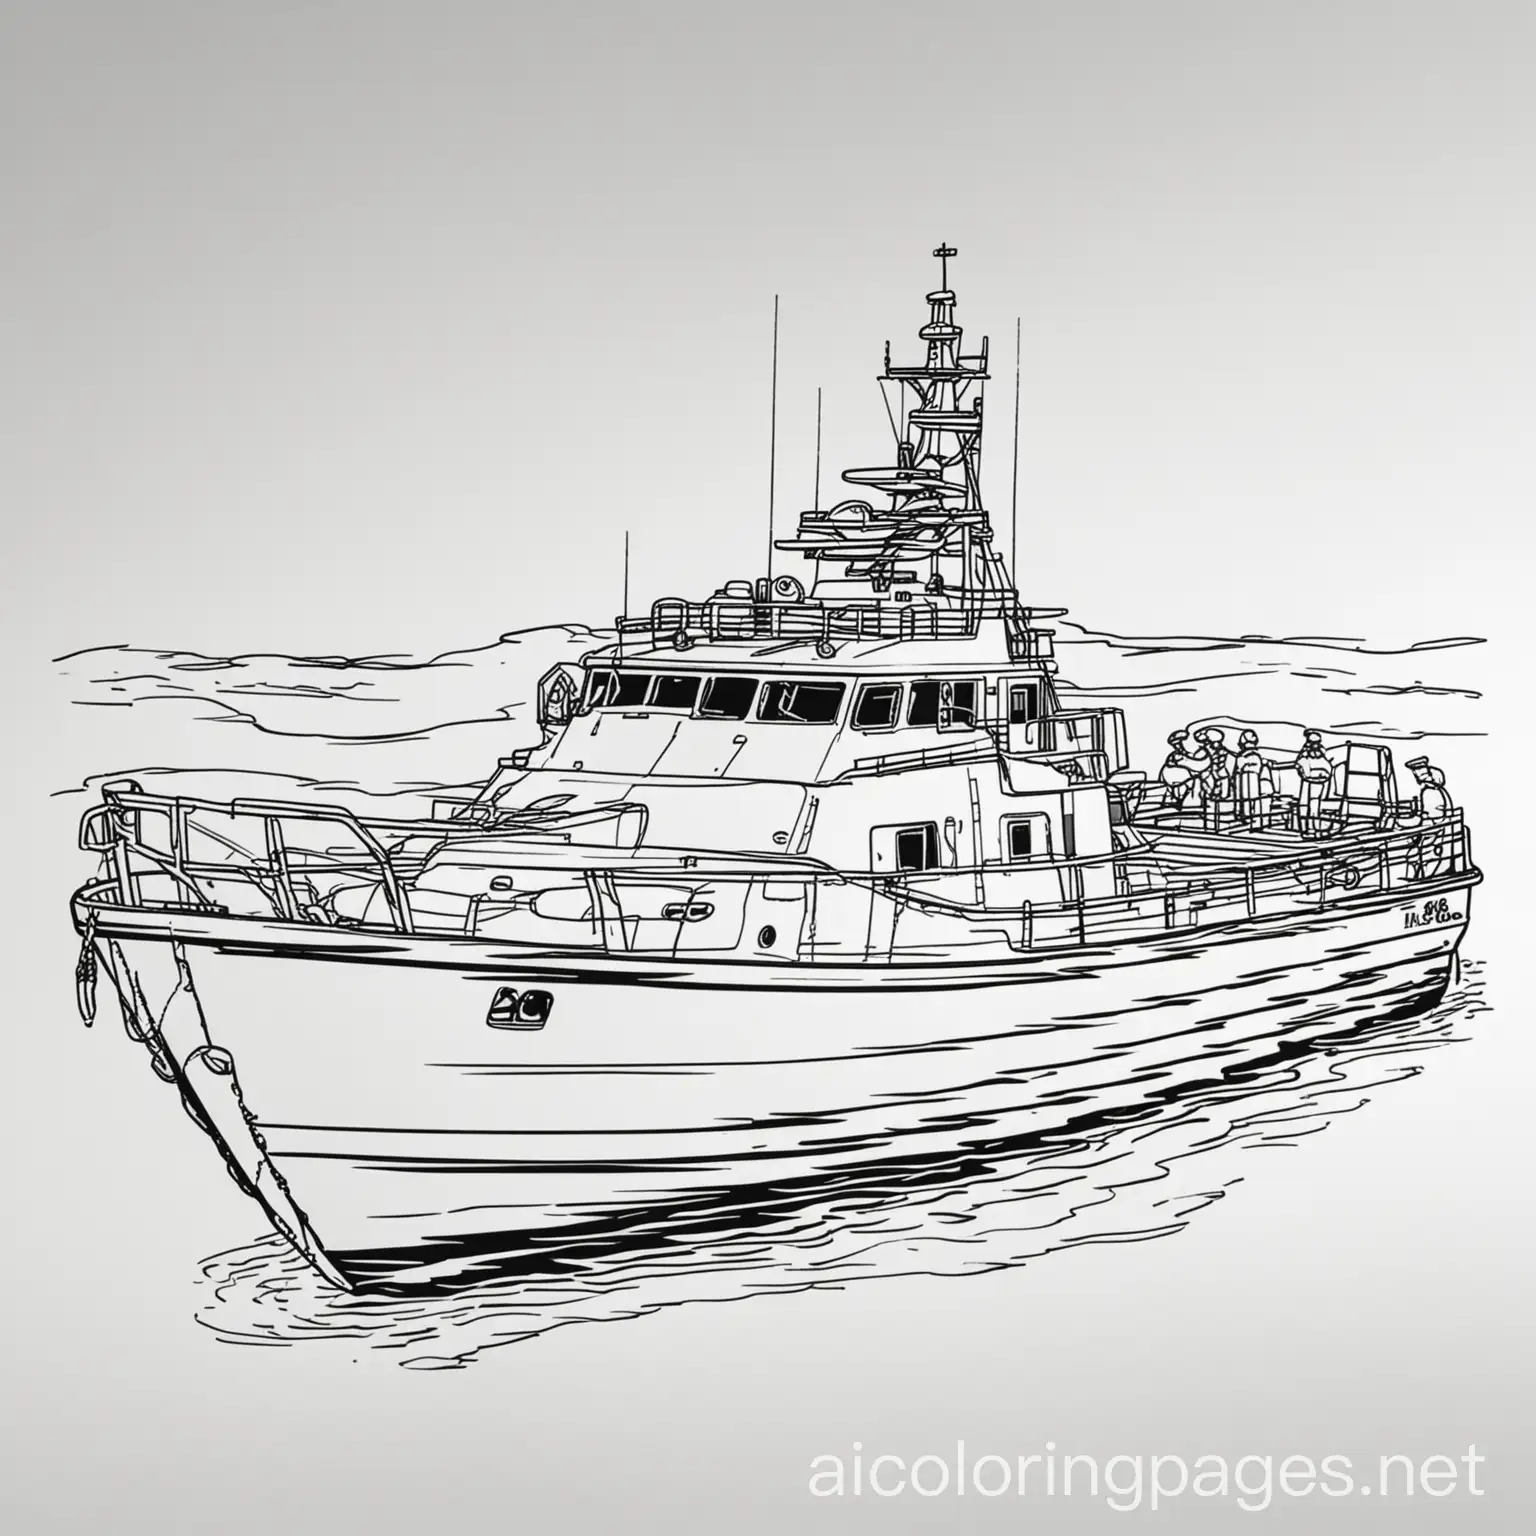 Military-Boat-Coloring-Page-Simple-Line-Art-for-Easy-Coloring-Fun